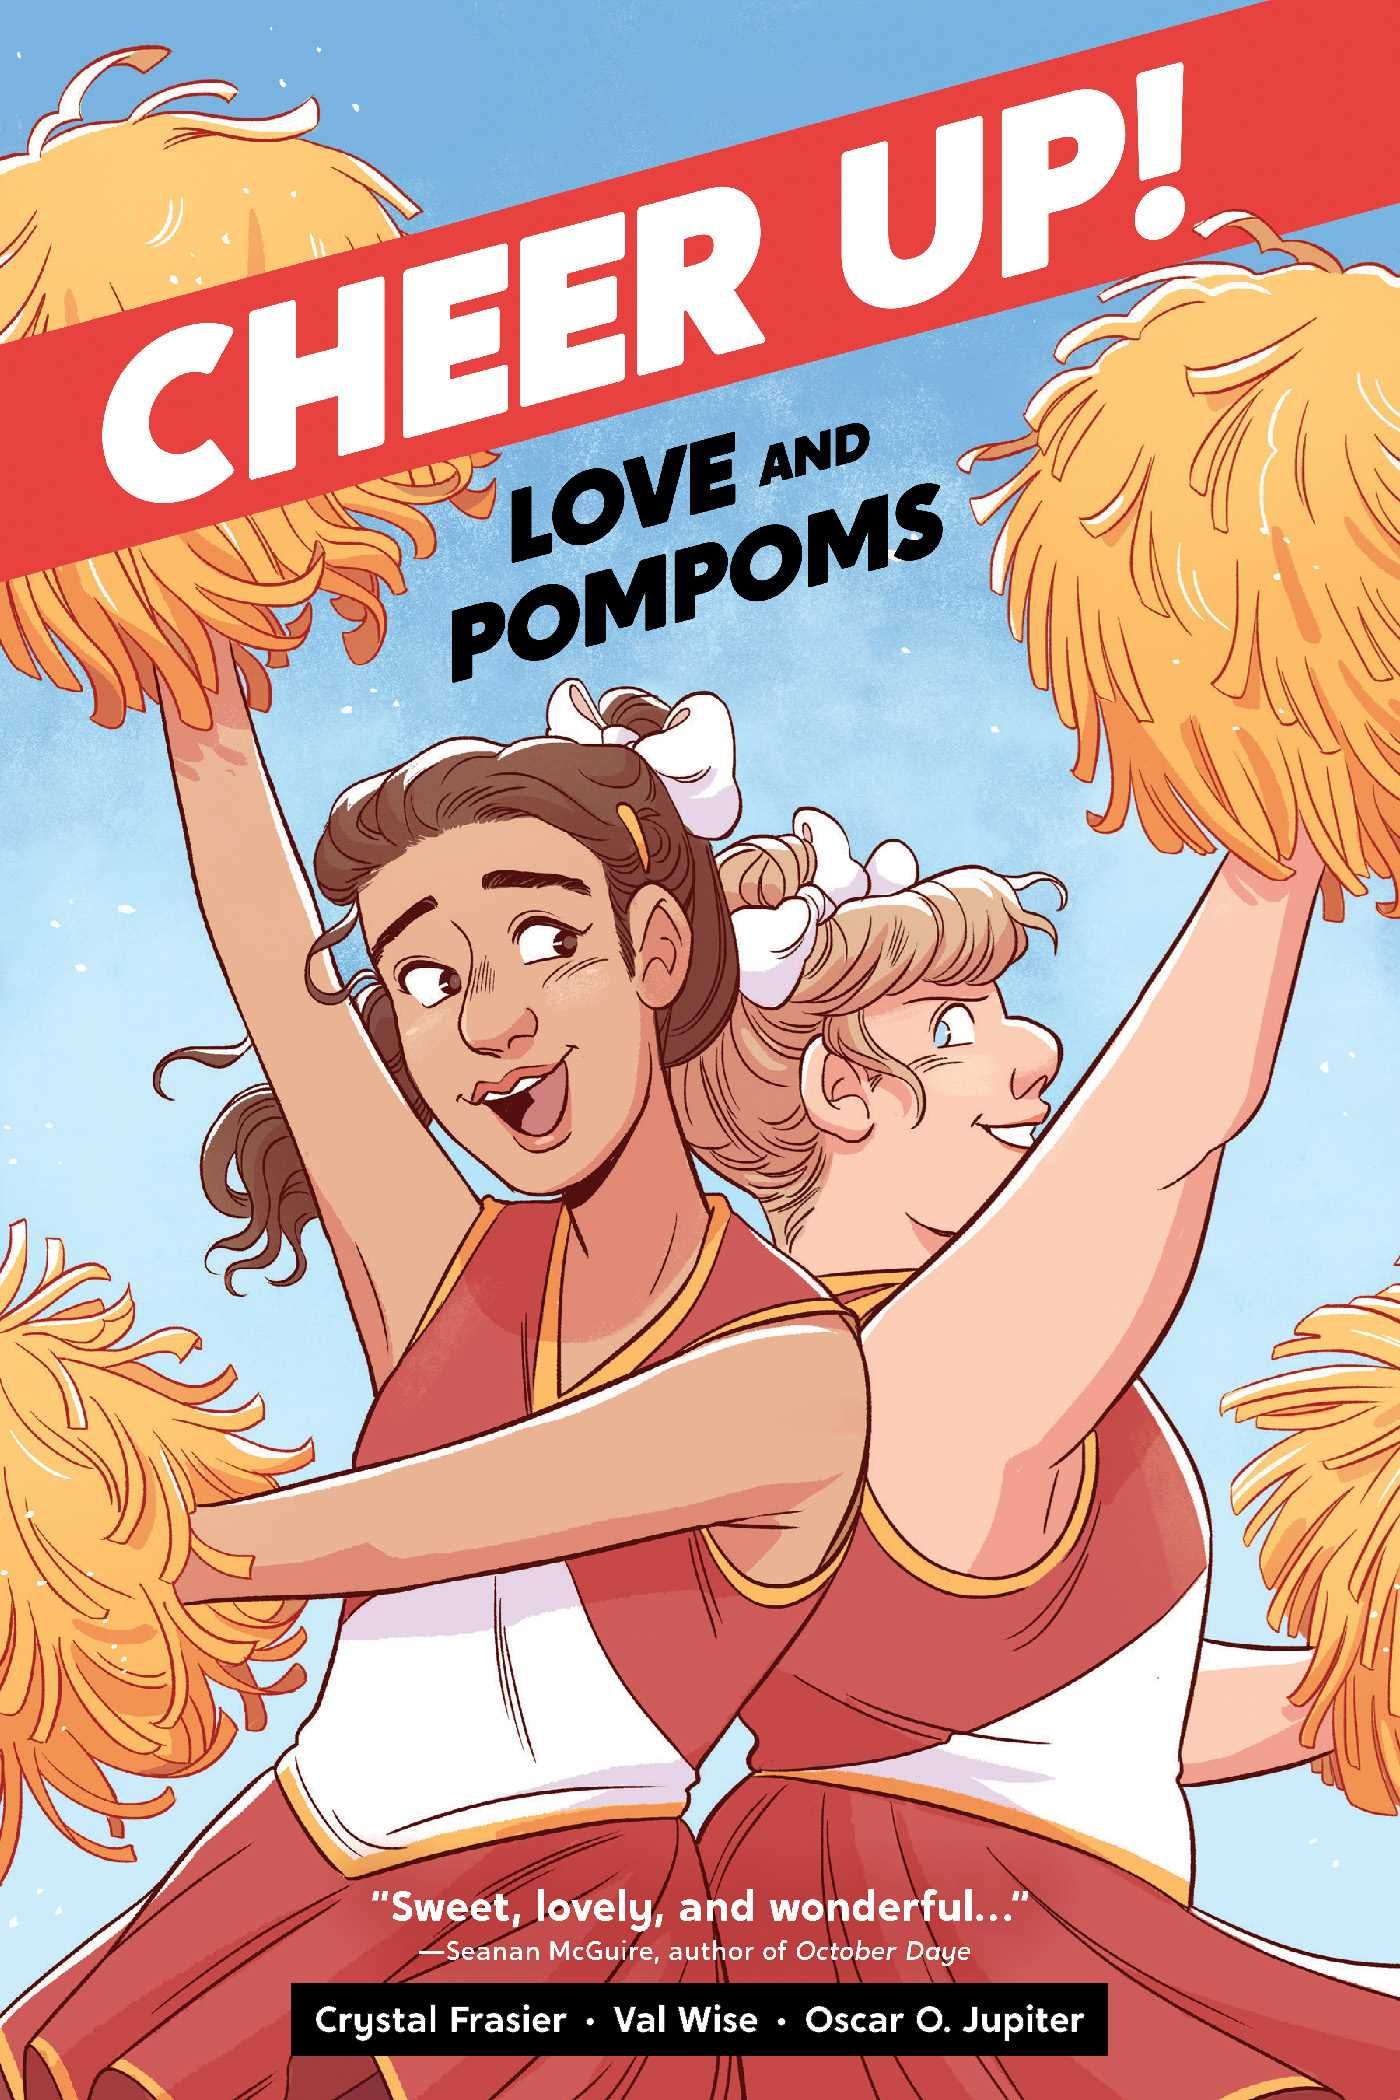 Cheer Up by Crystal Frasier and Val Wise